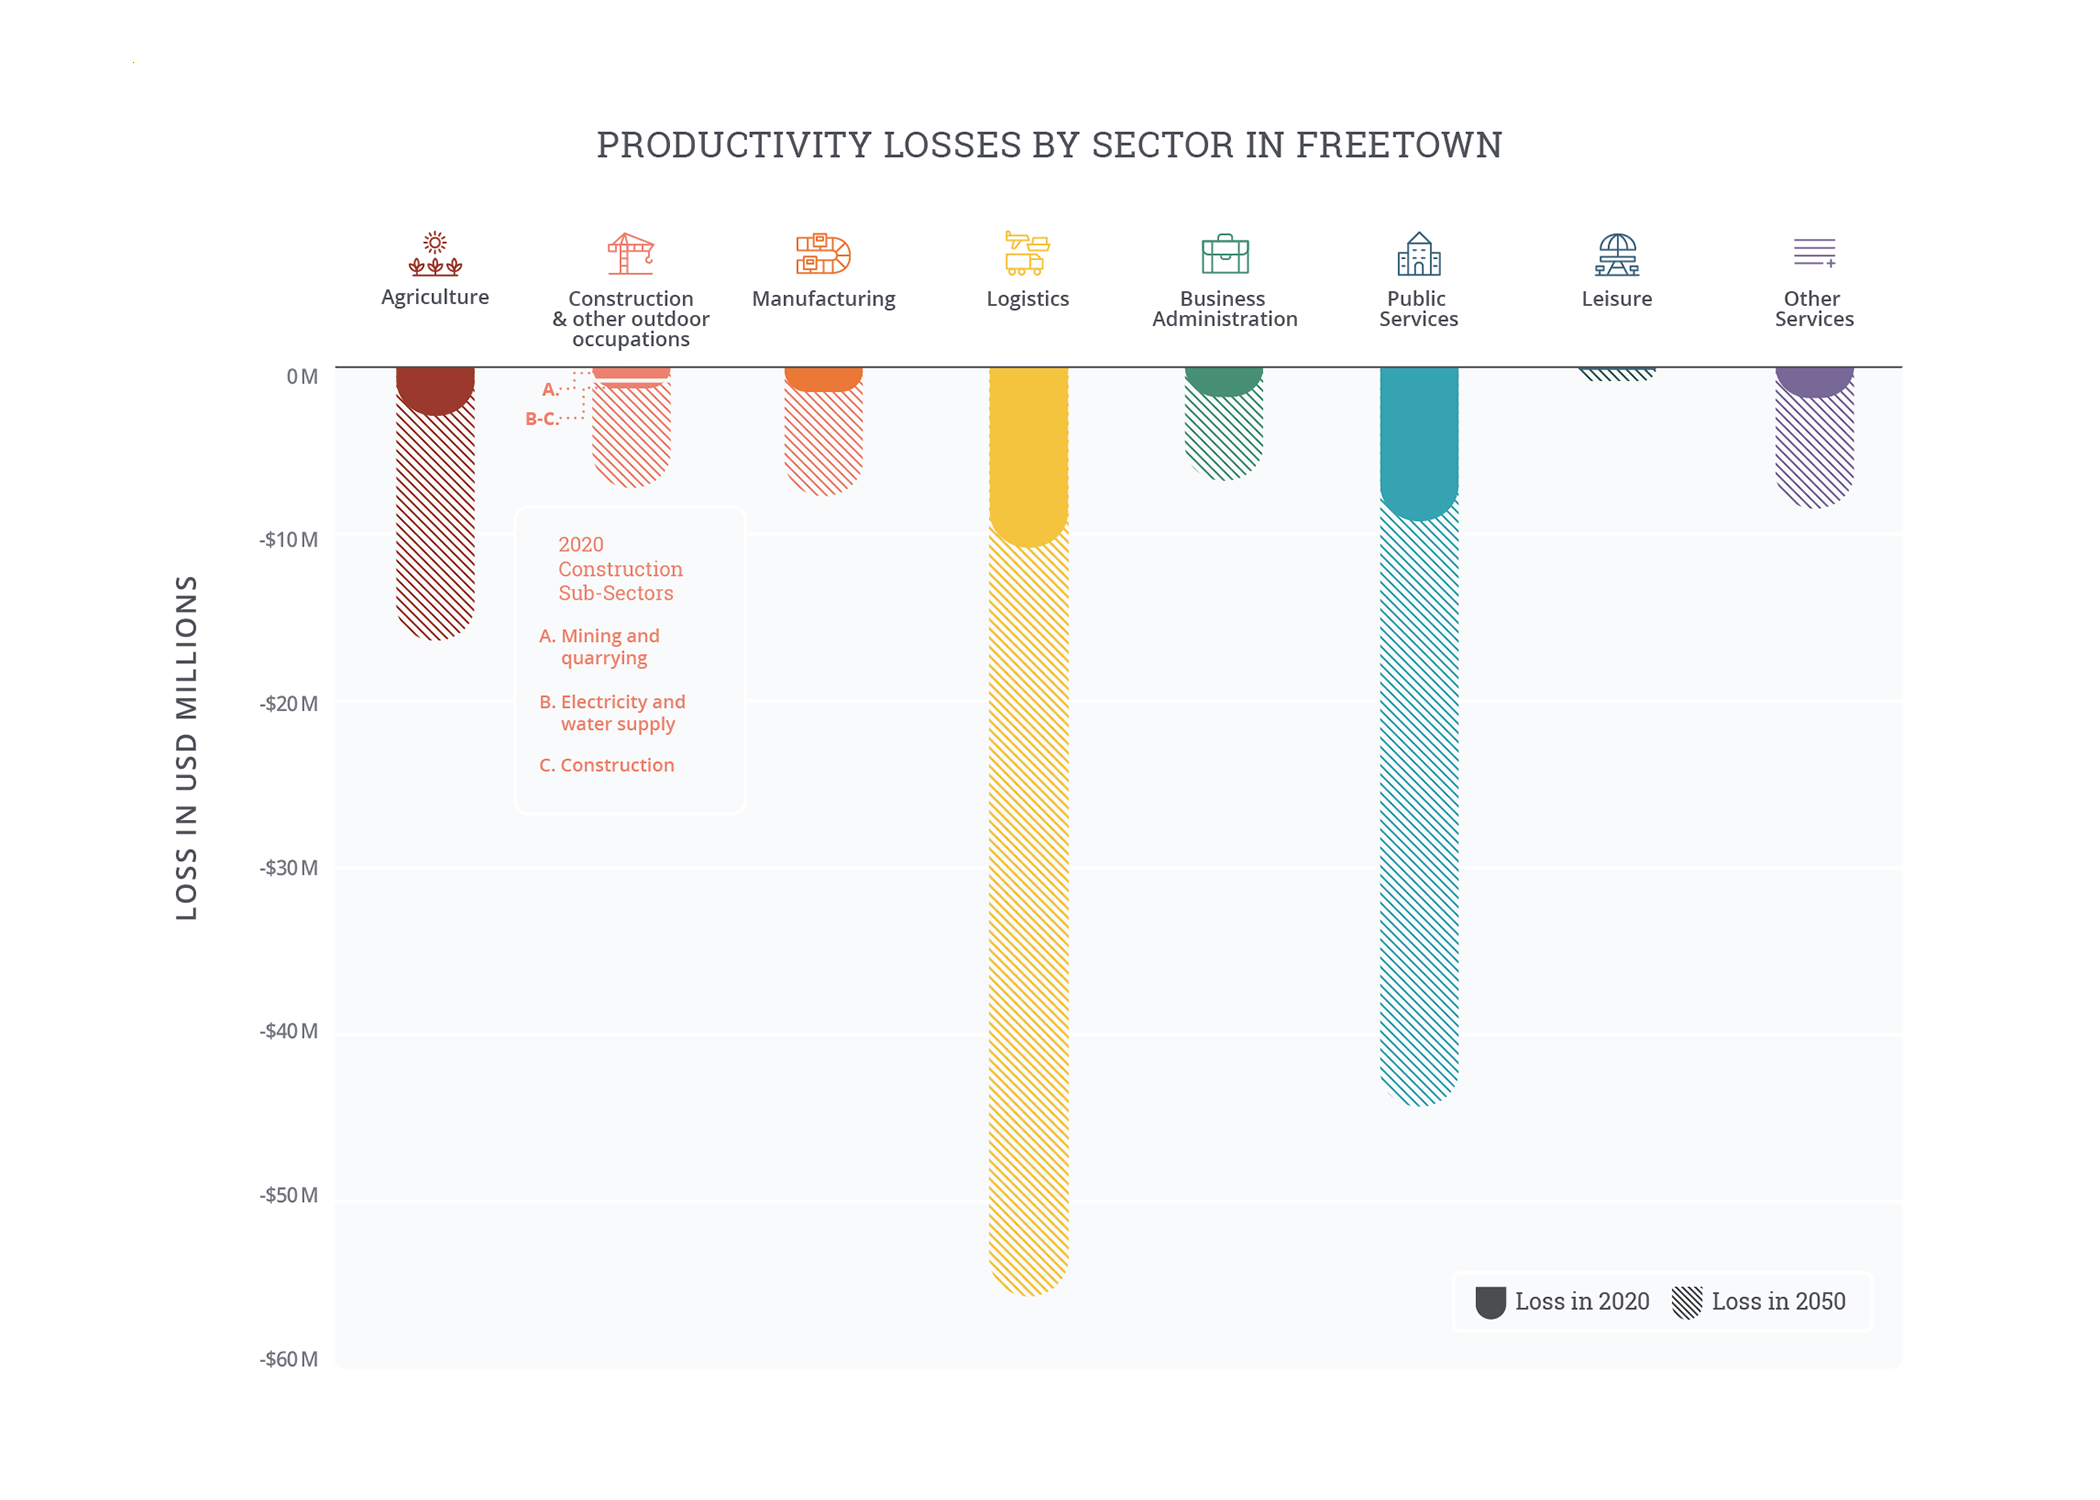 A stacked, inverted bar chart plots the productivity losses by sector (inUS $M) which Freetown currently experiences annually, against theprojected losses the city will face by 2050 once these have beenexacerbated by heat. The highest losses are in Logistics and PublicServices, which together, will cost the city approximately $99M.